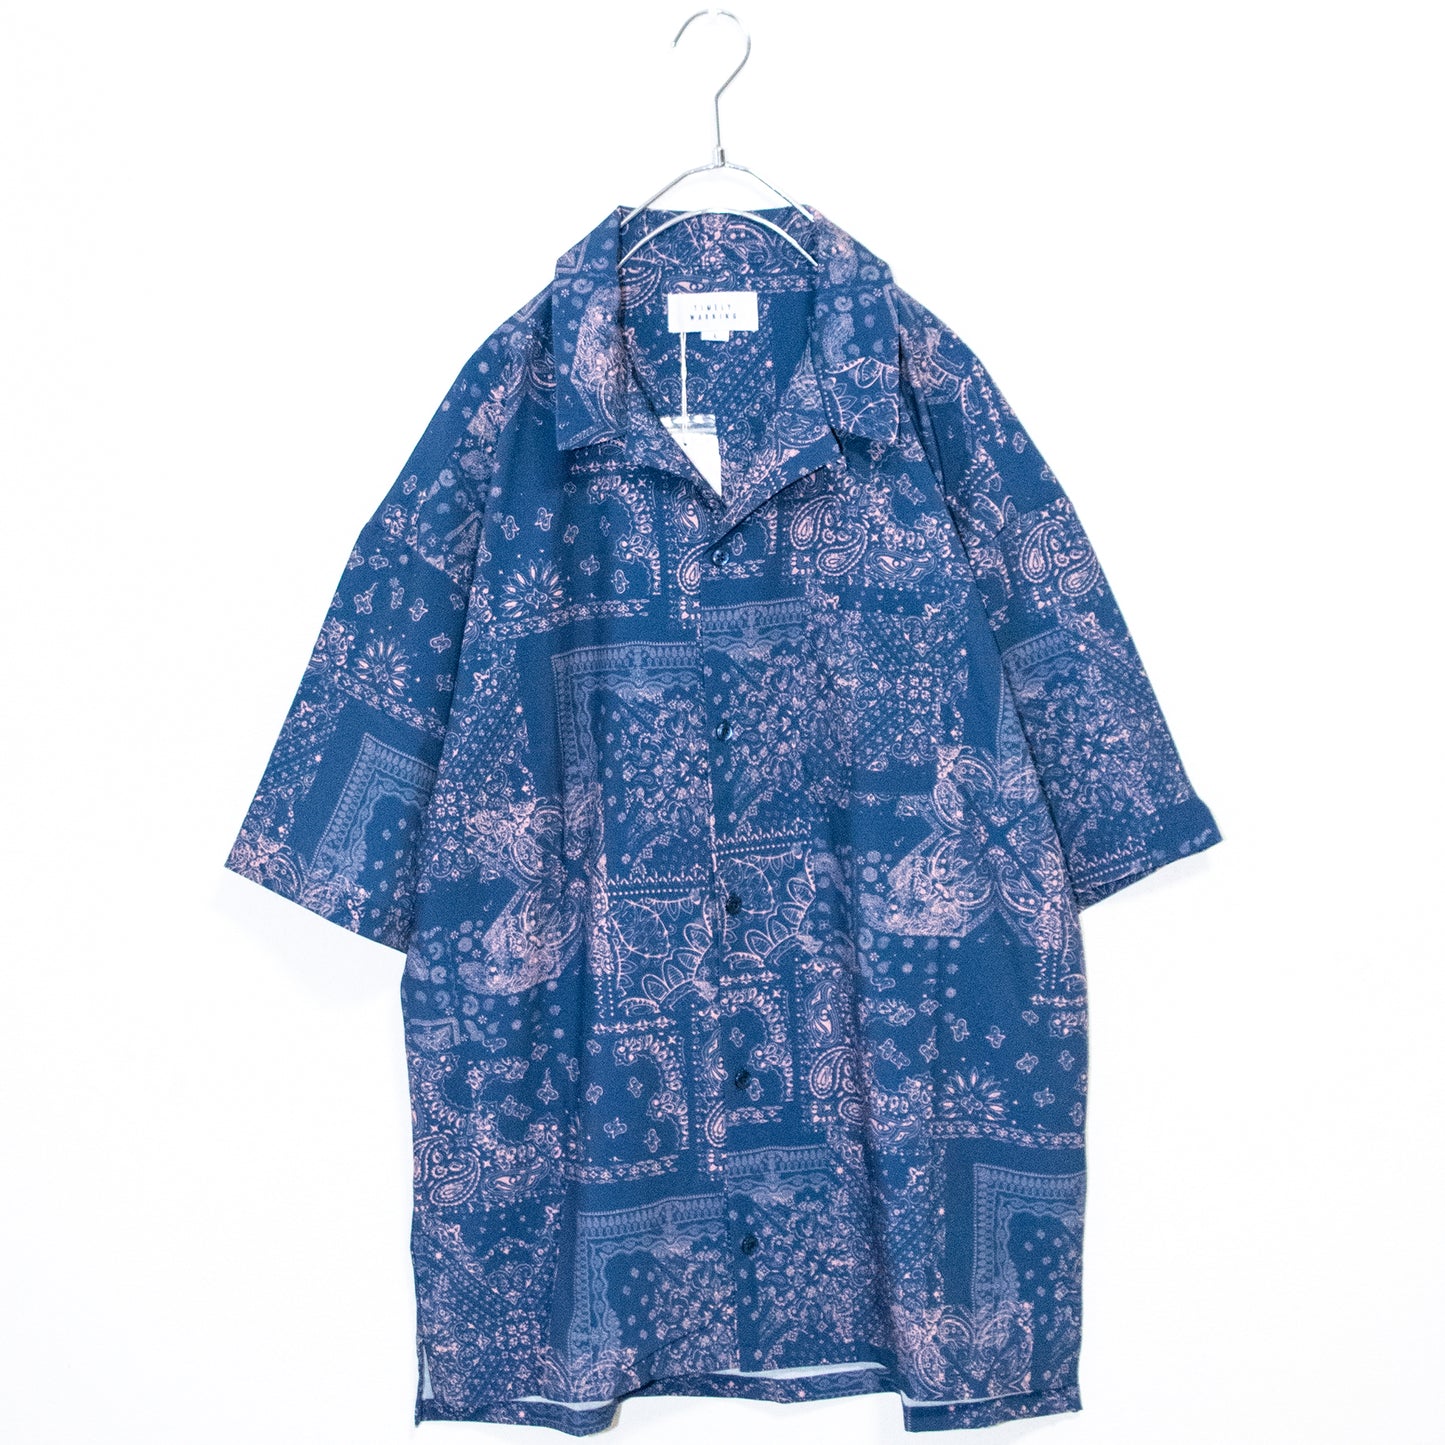 Bandana Open Collar S/S Shirt (2 color) - YOUAREMYPOISON